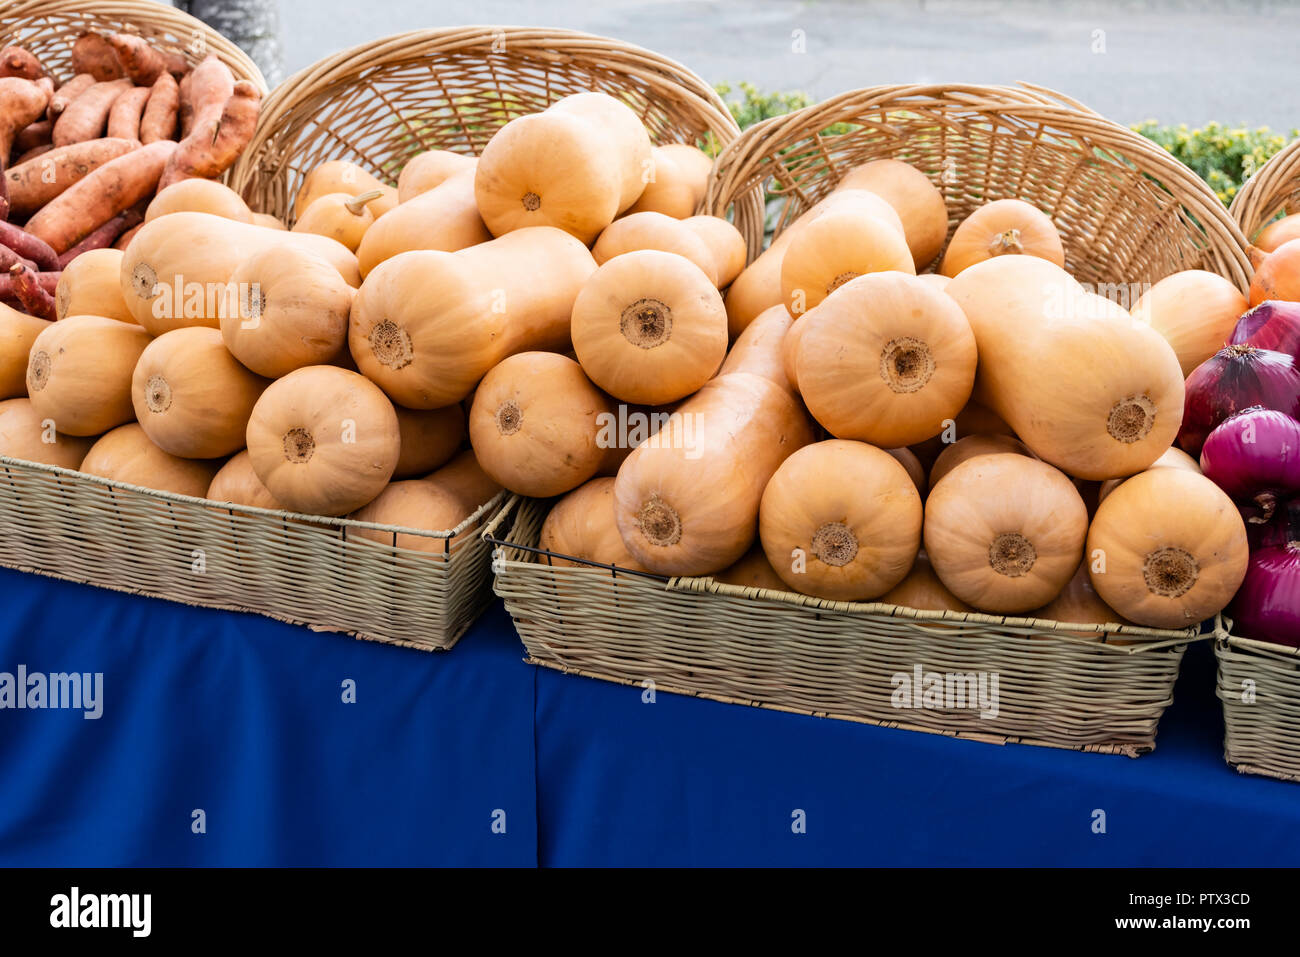 Butternut squash on display at the farmers market Stock Photo